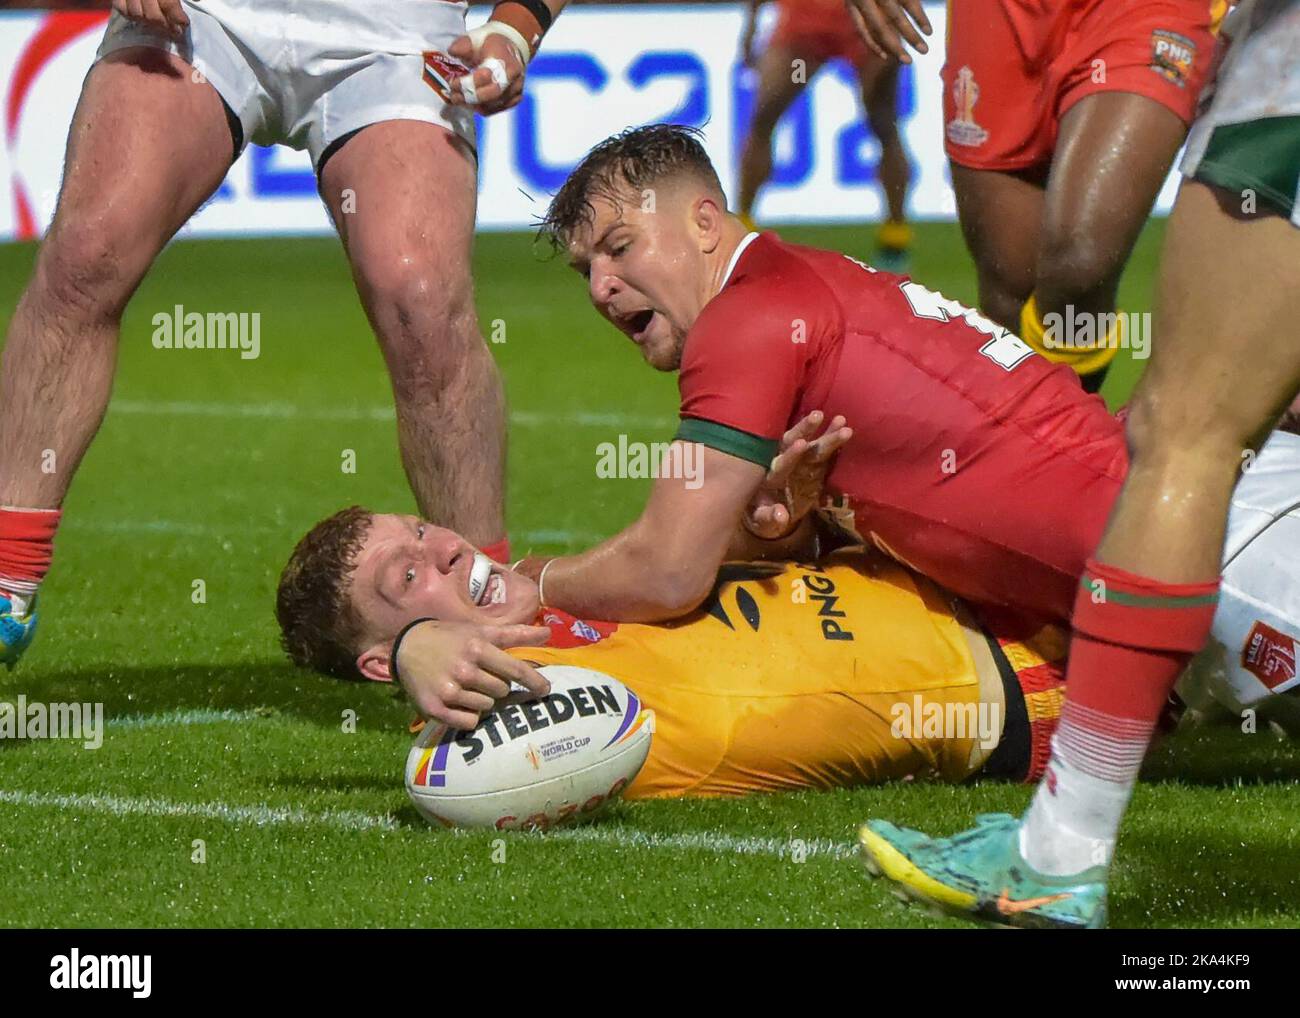 South Yorkshire, UK, October 31 2022, Rugby League World Cup 2021 group D match between Papua New Guinea v Wales at The Eco-Power Stadium, Doncaster, South Yorkshire, UK on October 31 2022   (Photo by Craig Cresswell/Alamy Live News) Stock Photo